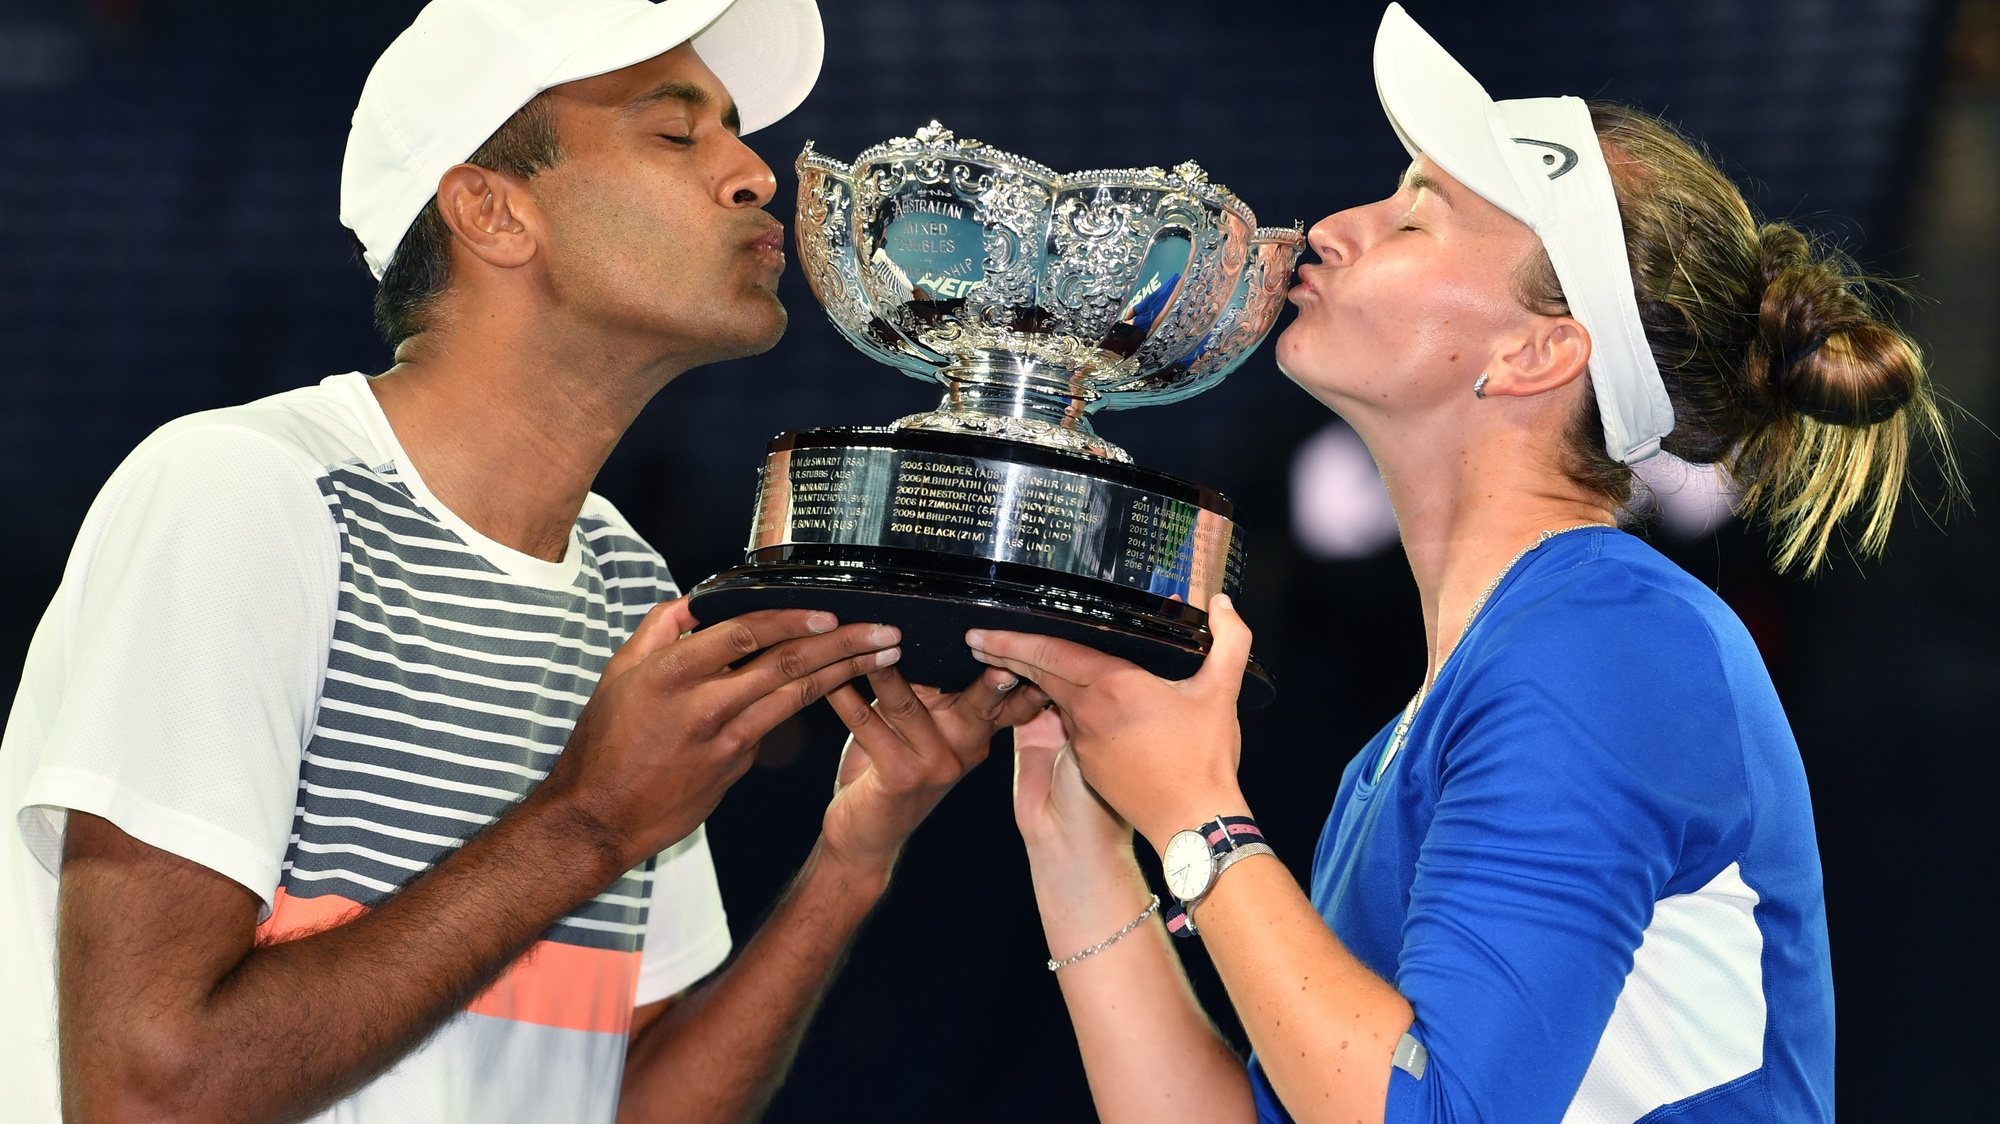 epa09025643 Barbora Krejcikova of the Czech Republic and Rajeev Ram of the United States kiss the trophy after winning the mixed doubles final against Matthew Ebden and Samantha Stosur of Australia on day 13 of the Australian Open tennis tournament at Rod Laver Arena in Melbourne, Australia, 20 February 2021.  EPA/DEAN LEWINS  AUSTRALIA AND NEW ZEALAND OUT